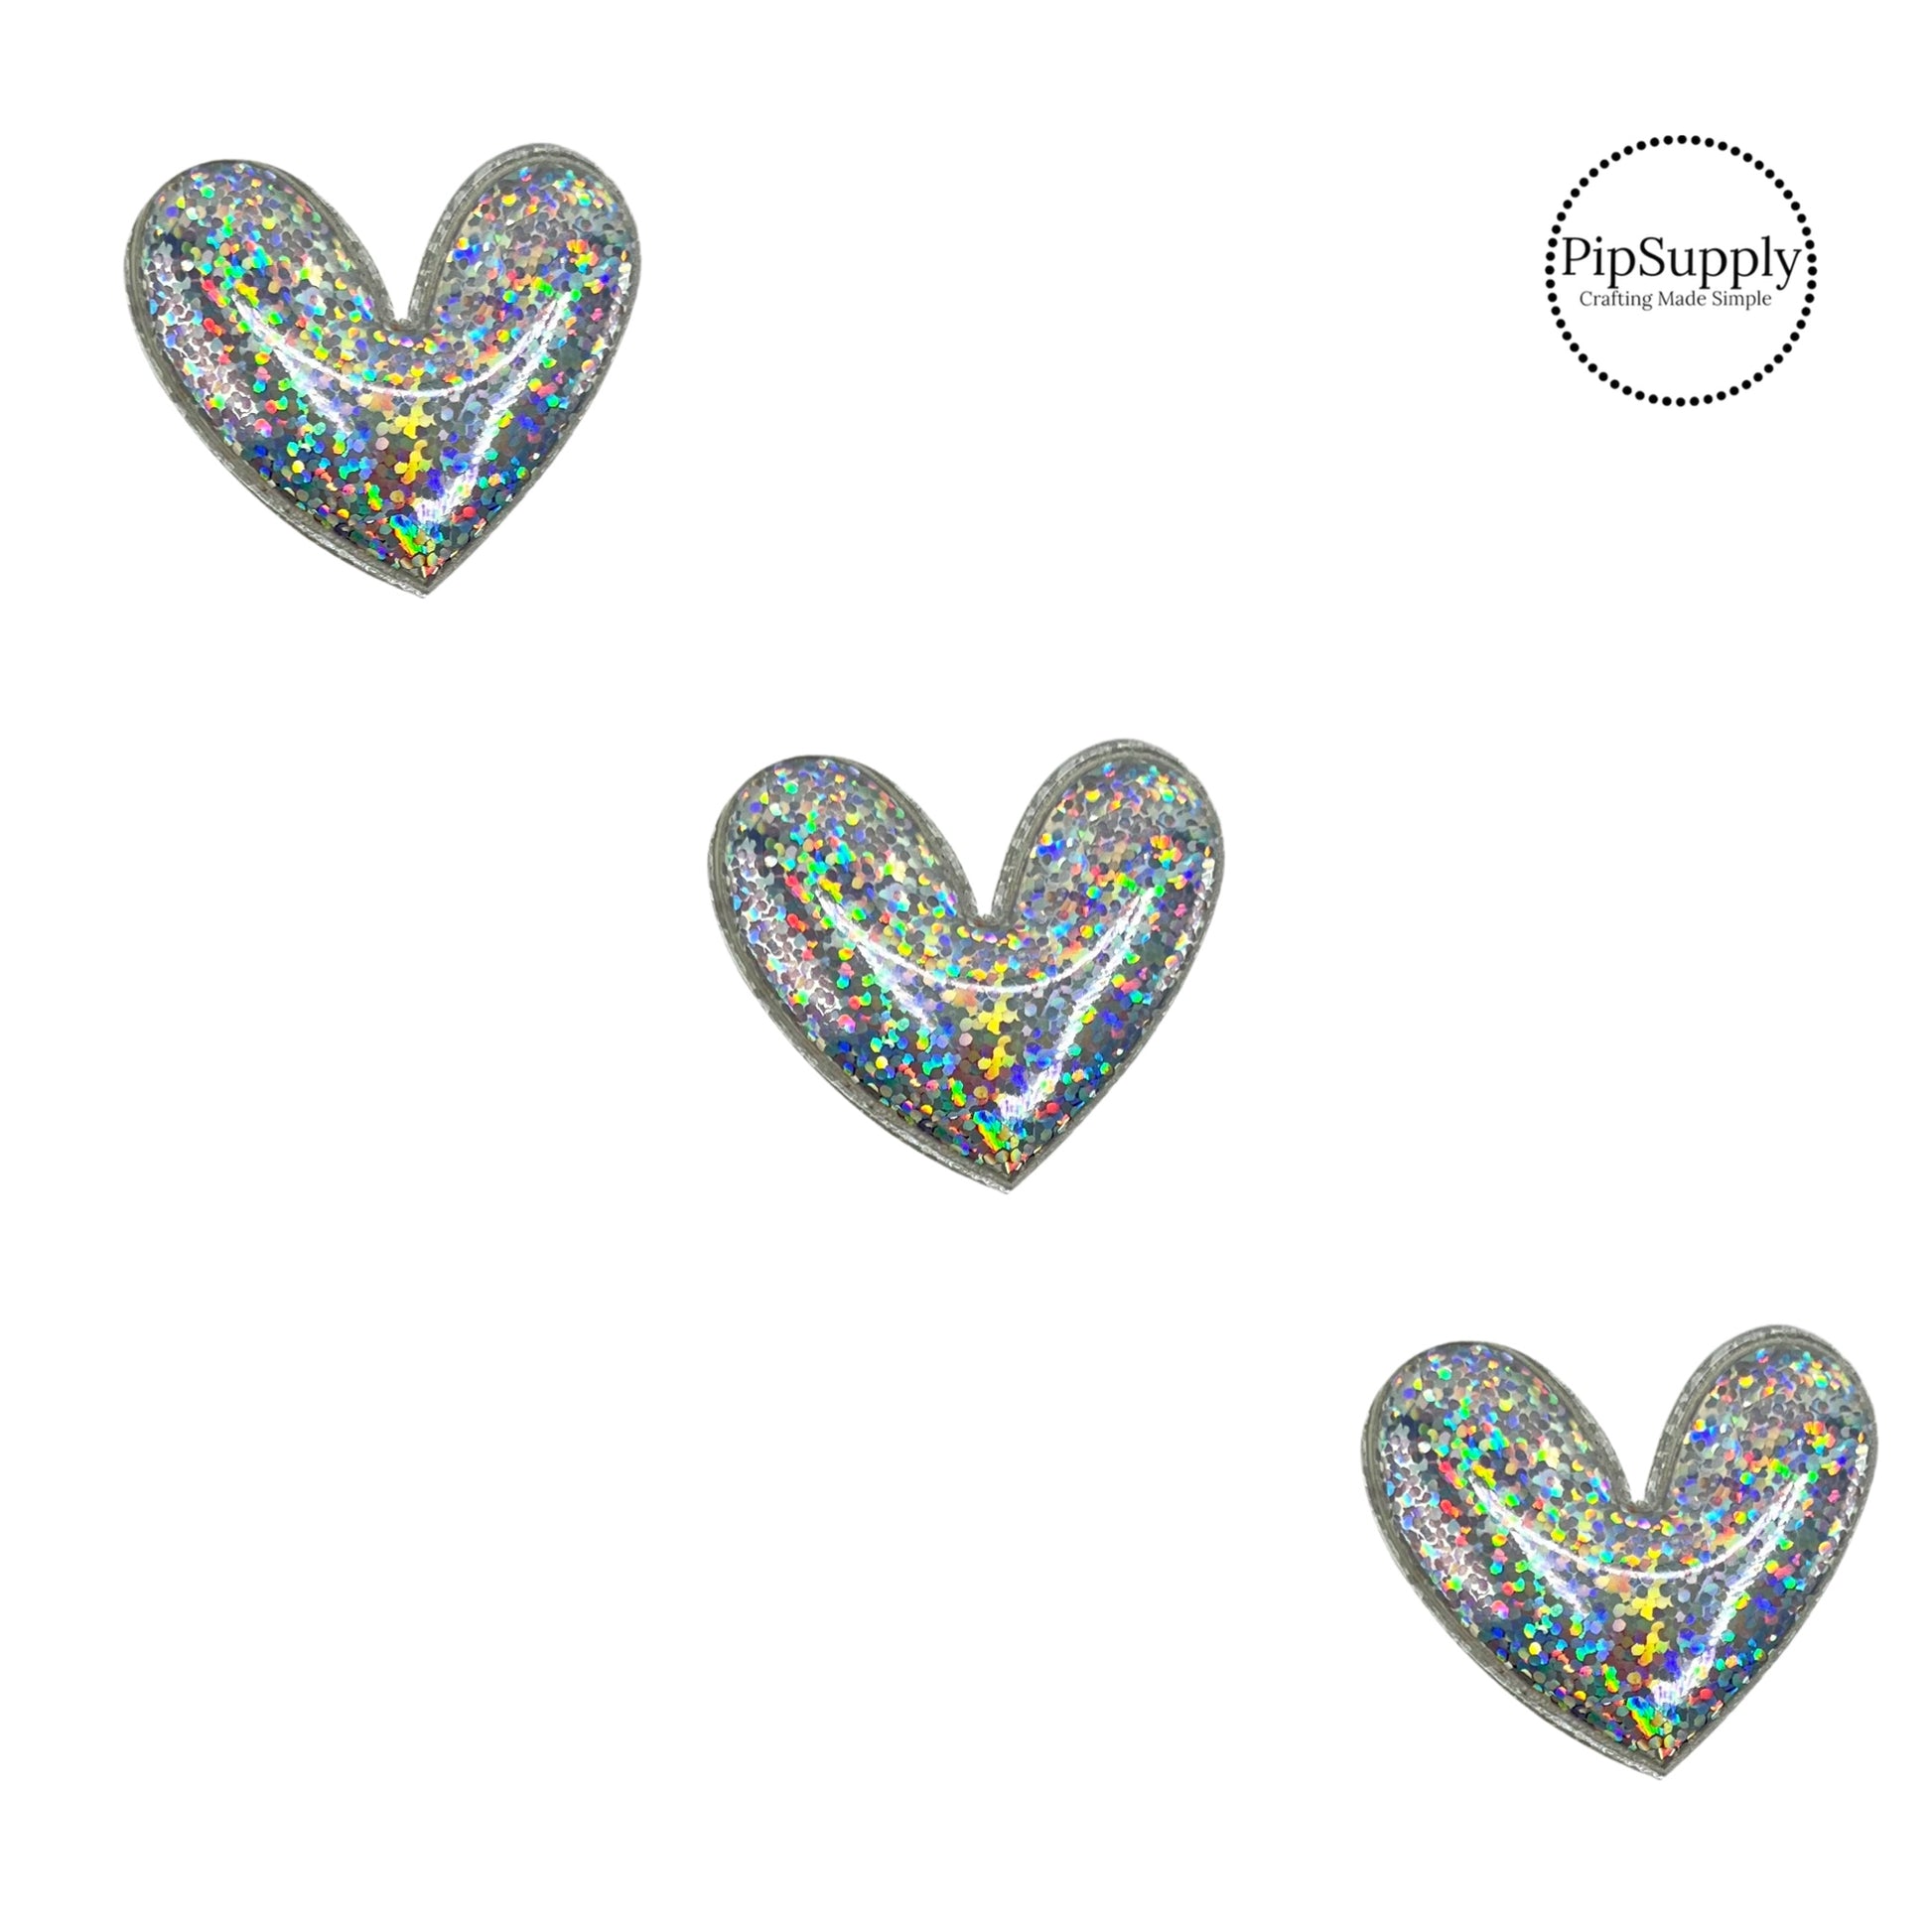 holographic heart craft embellishment with a fabric backing and is about 2 inches wide